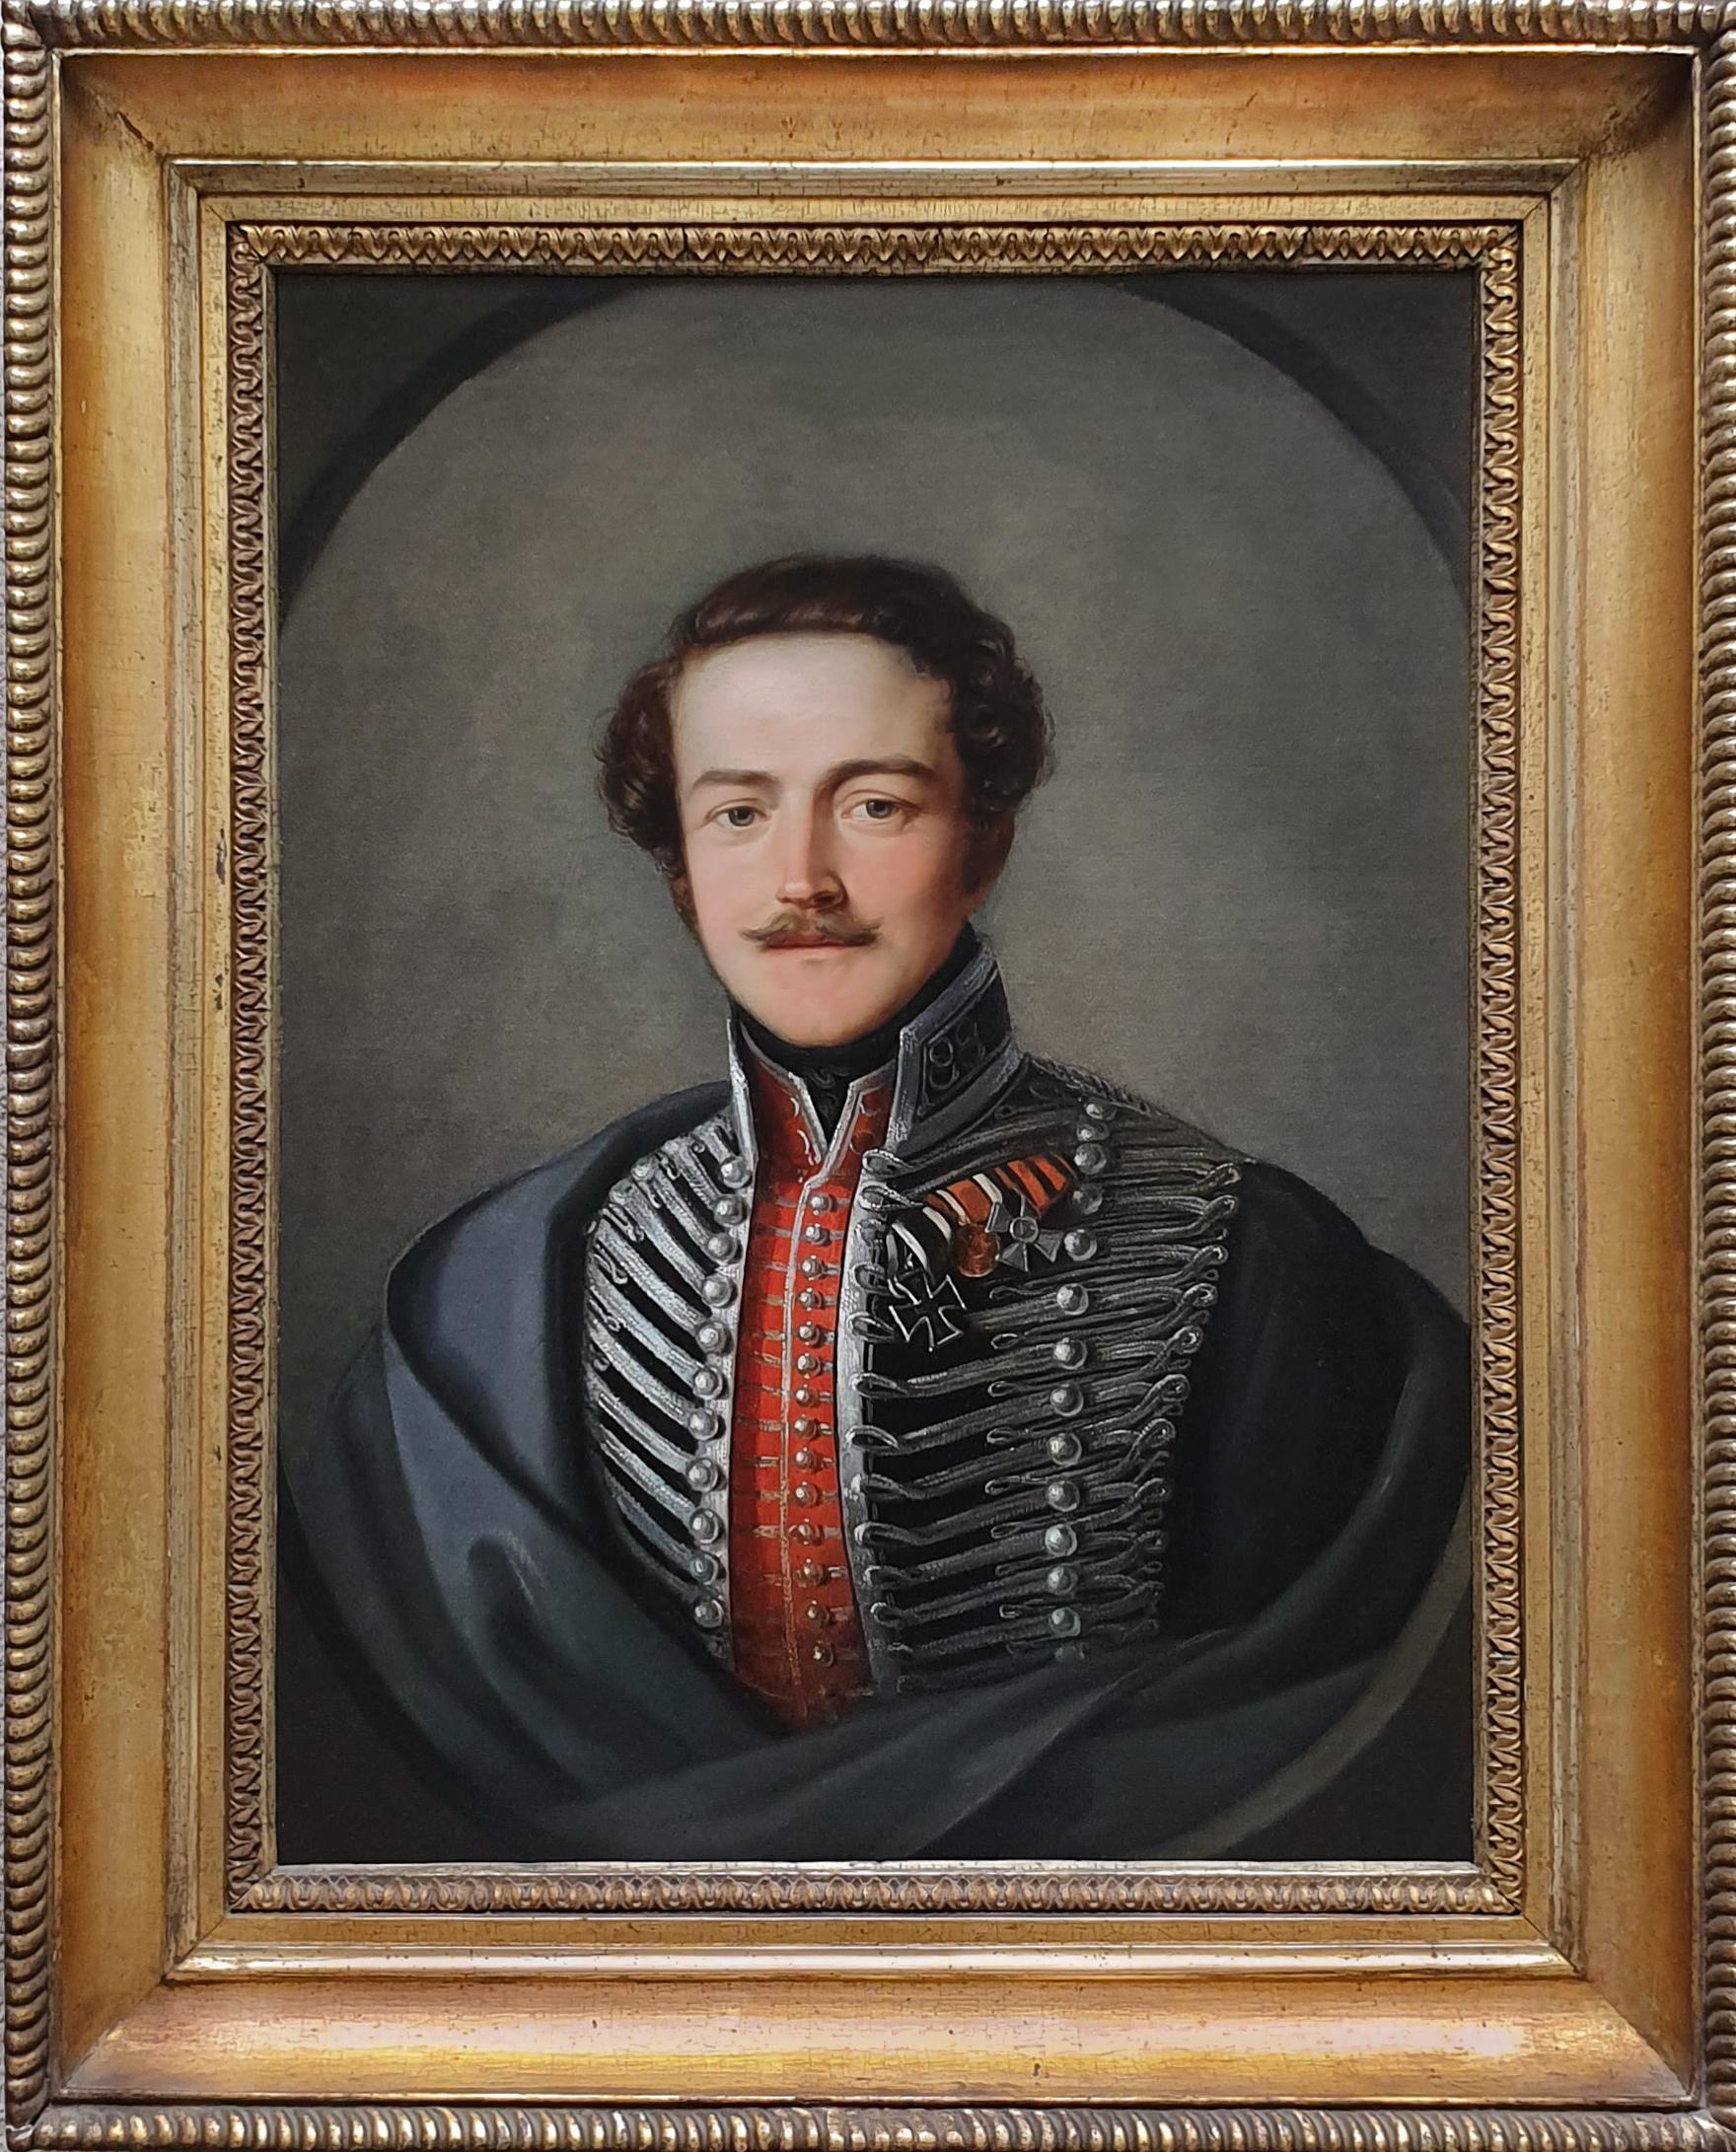 Titan Fine Art is pleased to present this exquisite bust length portrait a striking young gentleman is wearing a formal military uniform of scarlet and black coat profusely decorated with multiple rows of silver frogging, buttons and silver